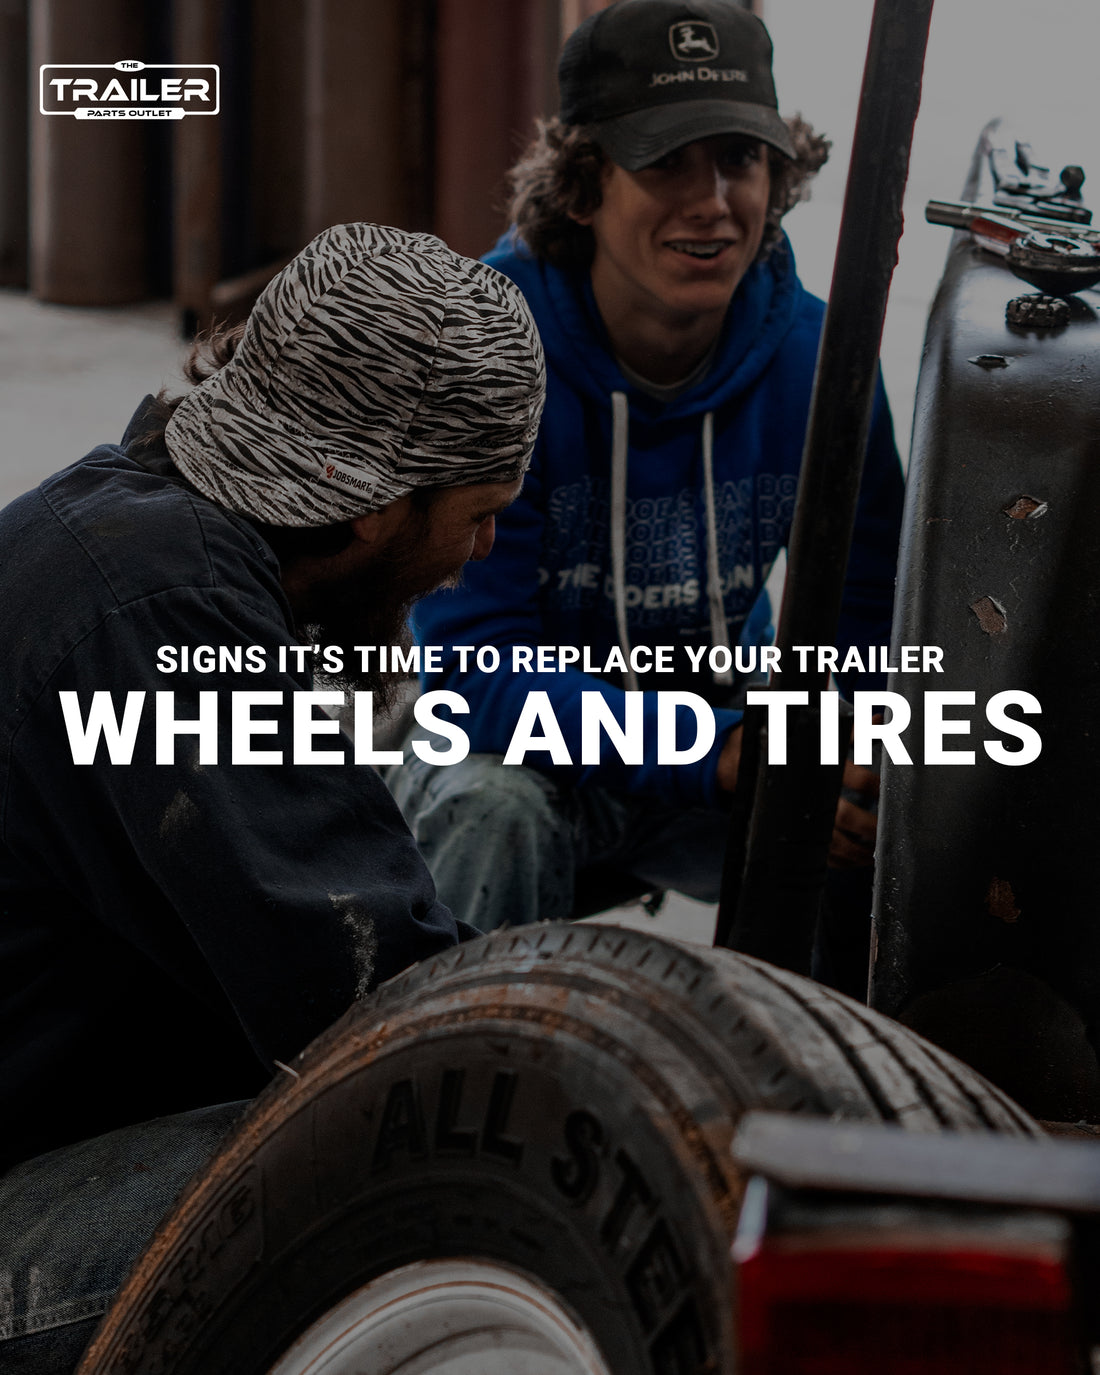 Signs it’s Time to Replace Your Trailer Wheels and Tires